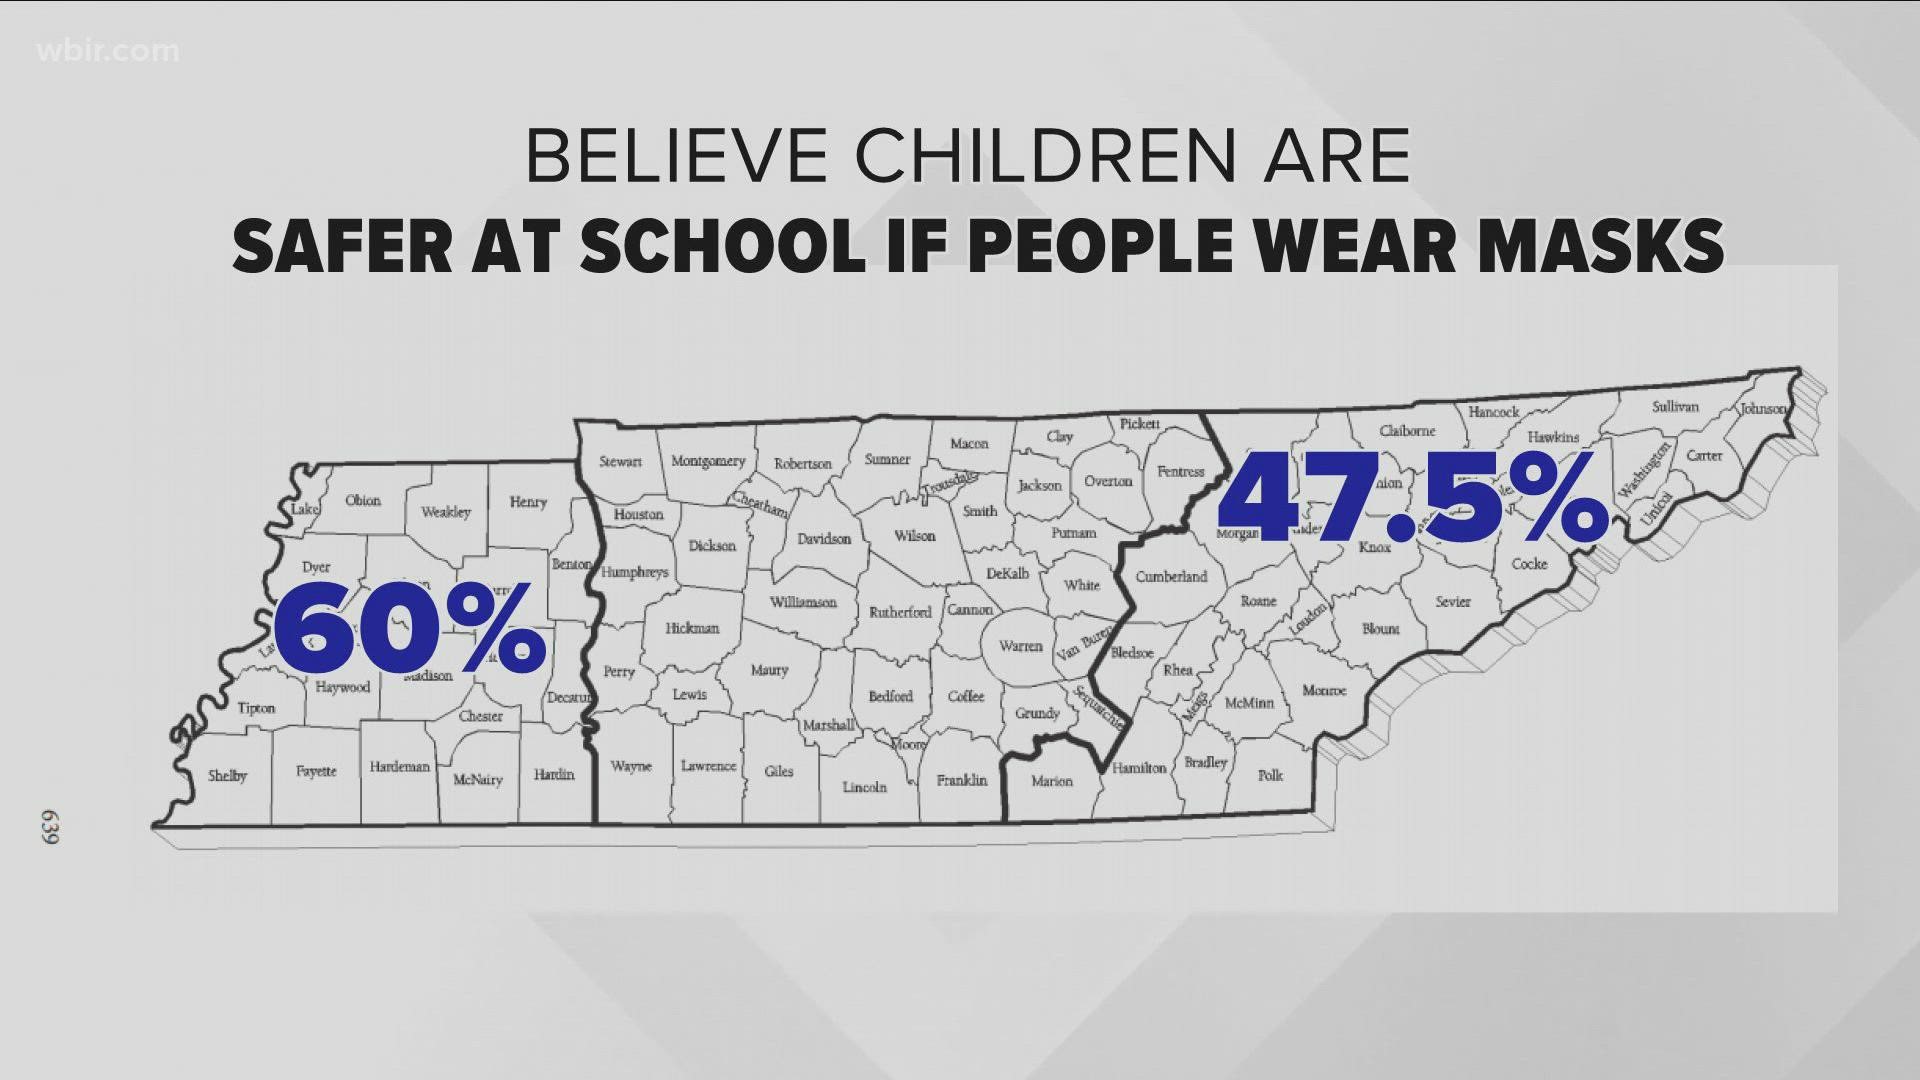 Around 60% of West Tennessee parents in the study believed children were safer in school if educators wore masks, compared to around 47% in East Tennessee.